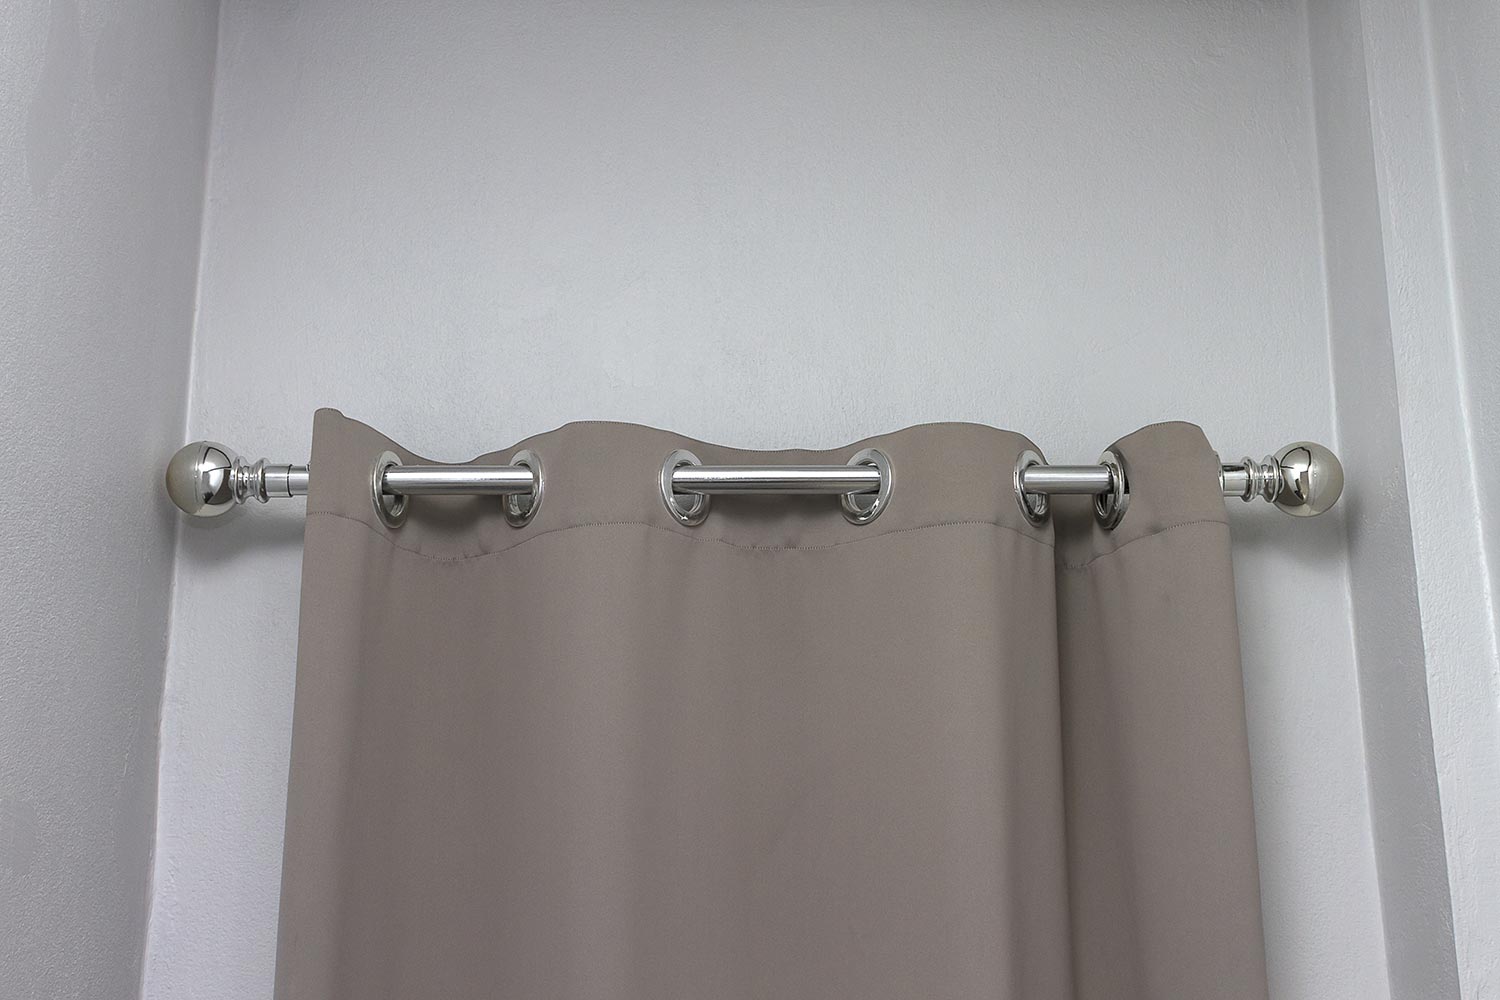 Gray curtain and stainless bar hanging on wall